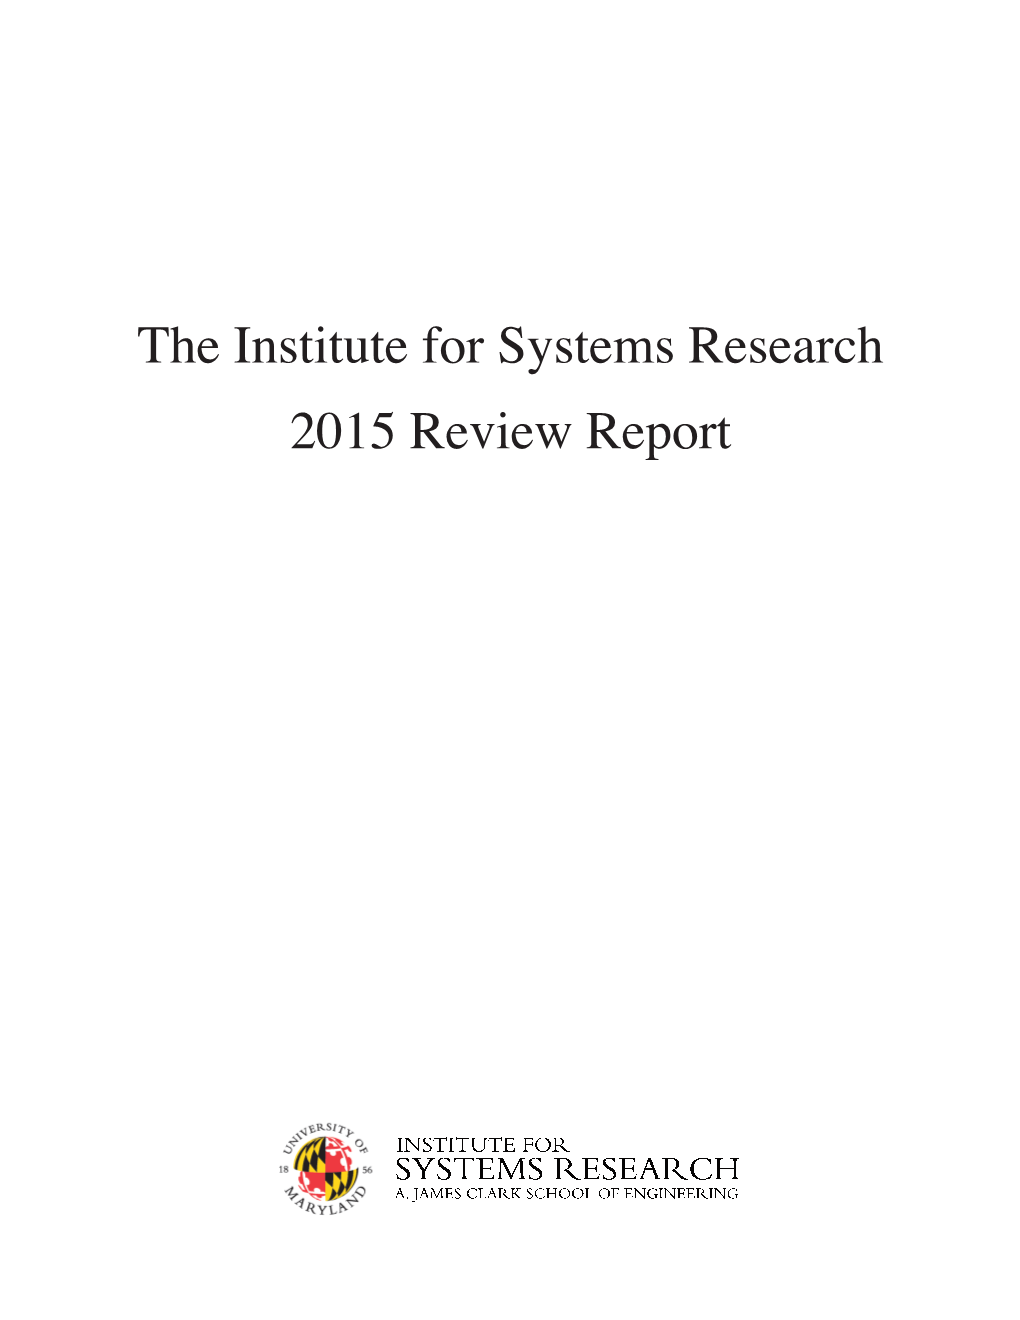 2015 ISR Review Report